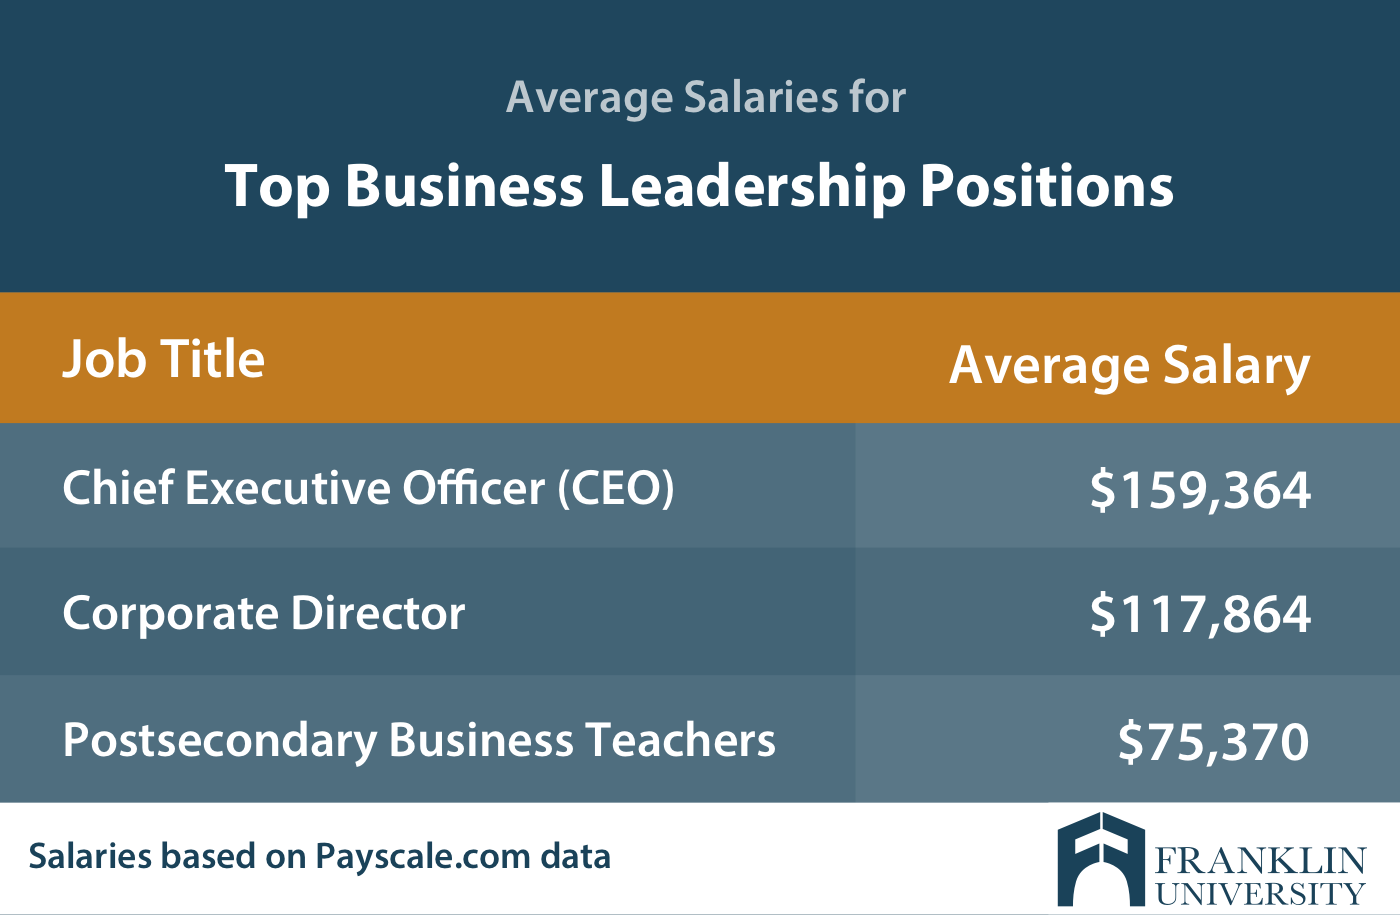 graphic describing the average salaries for top business leadership positions